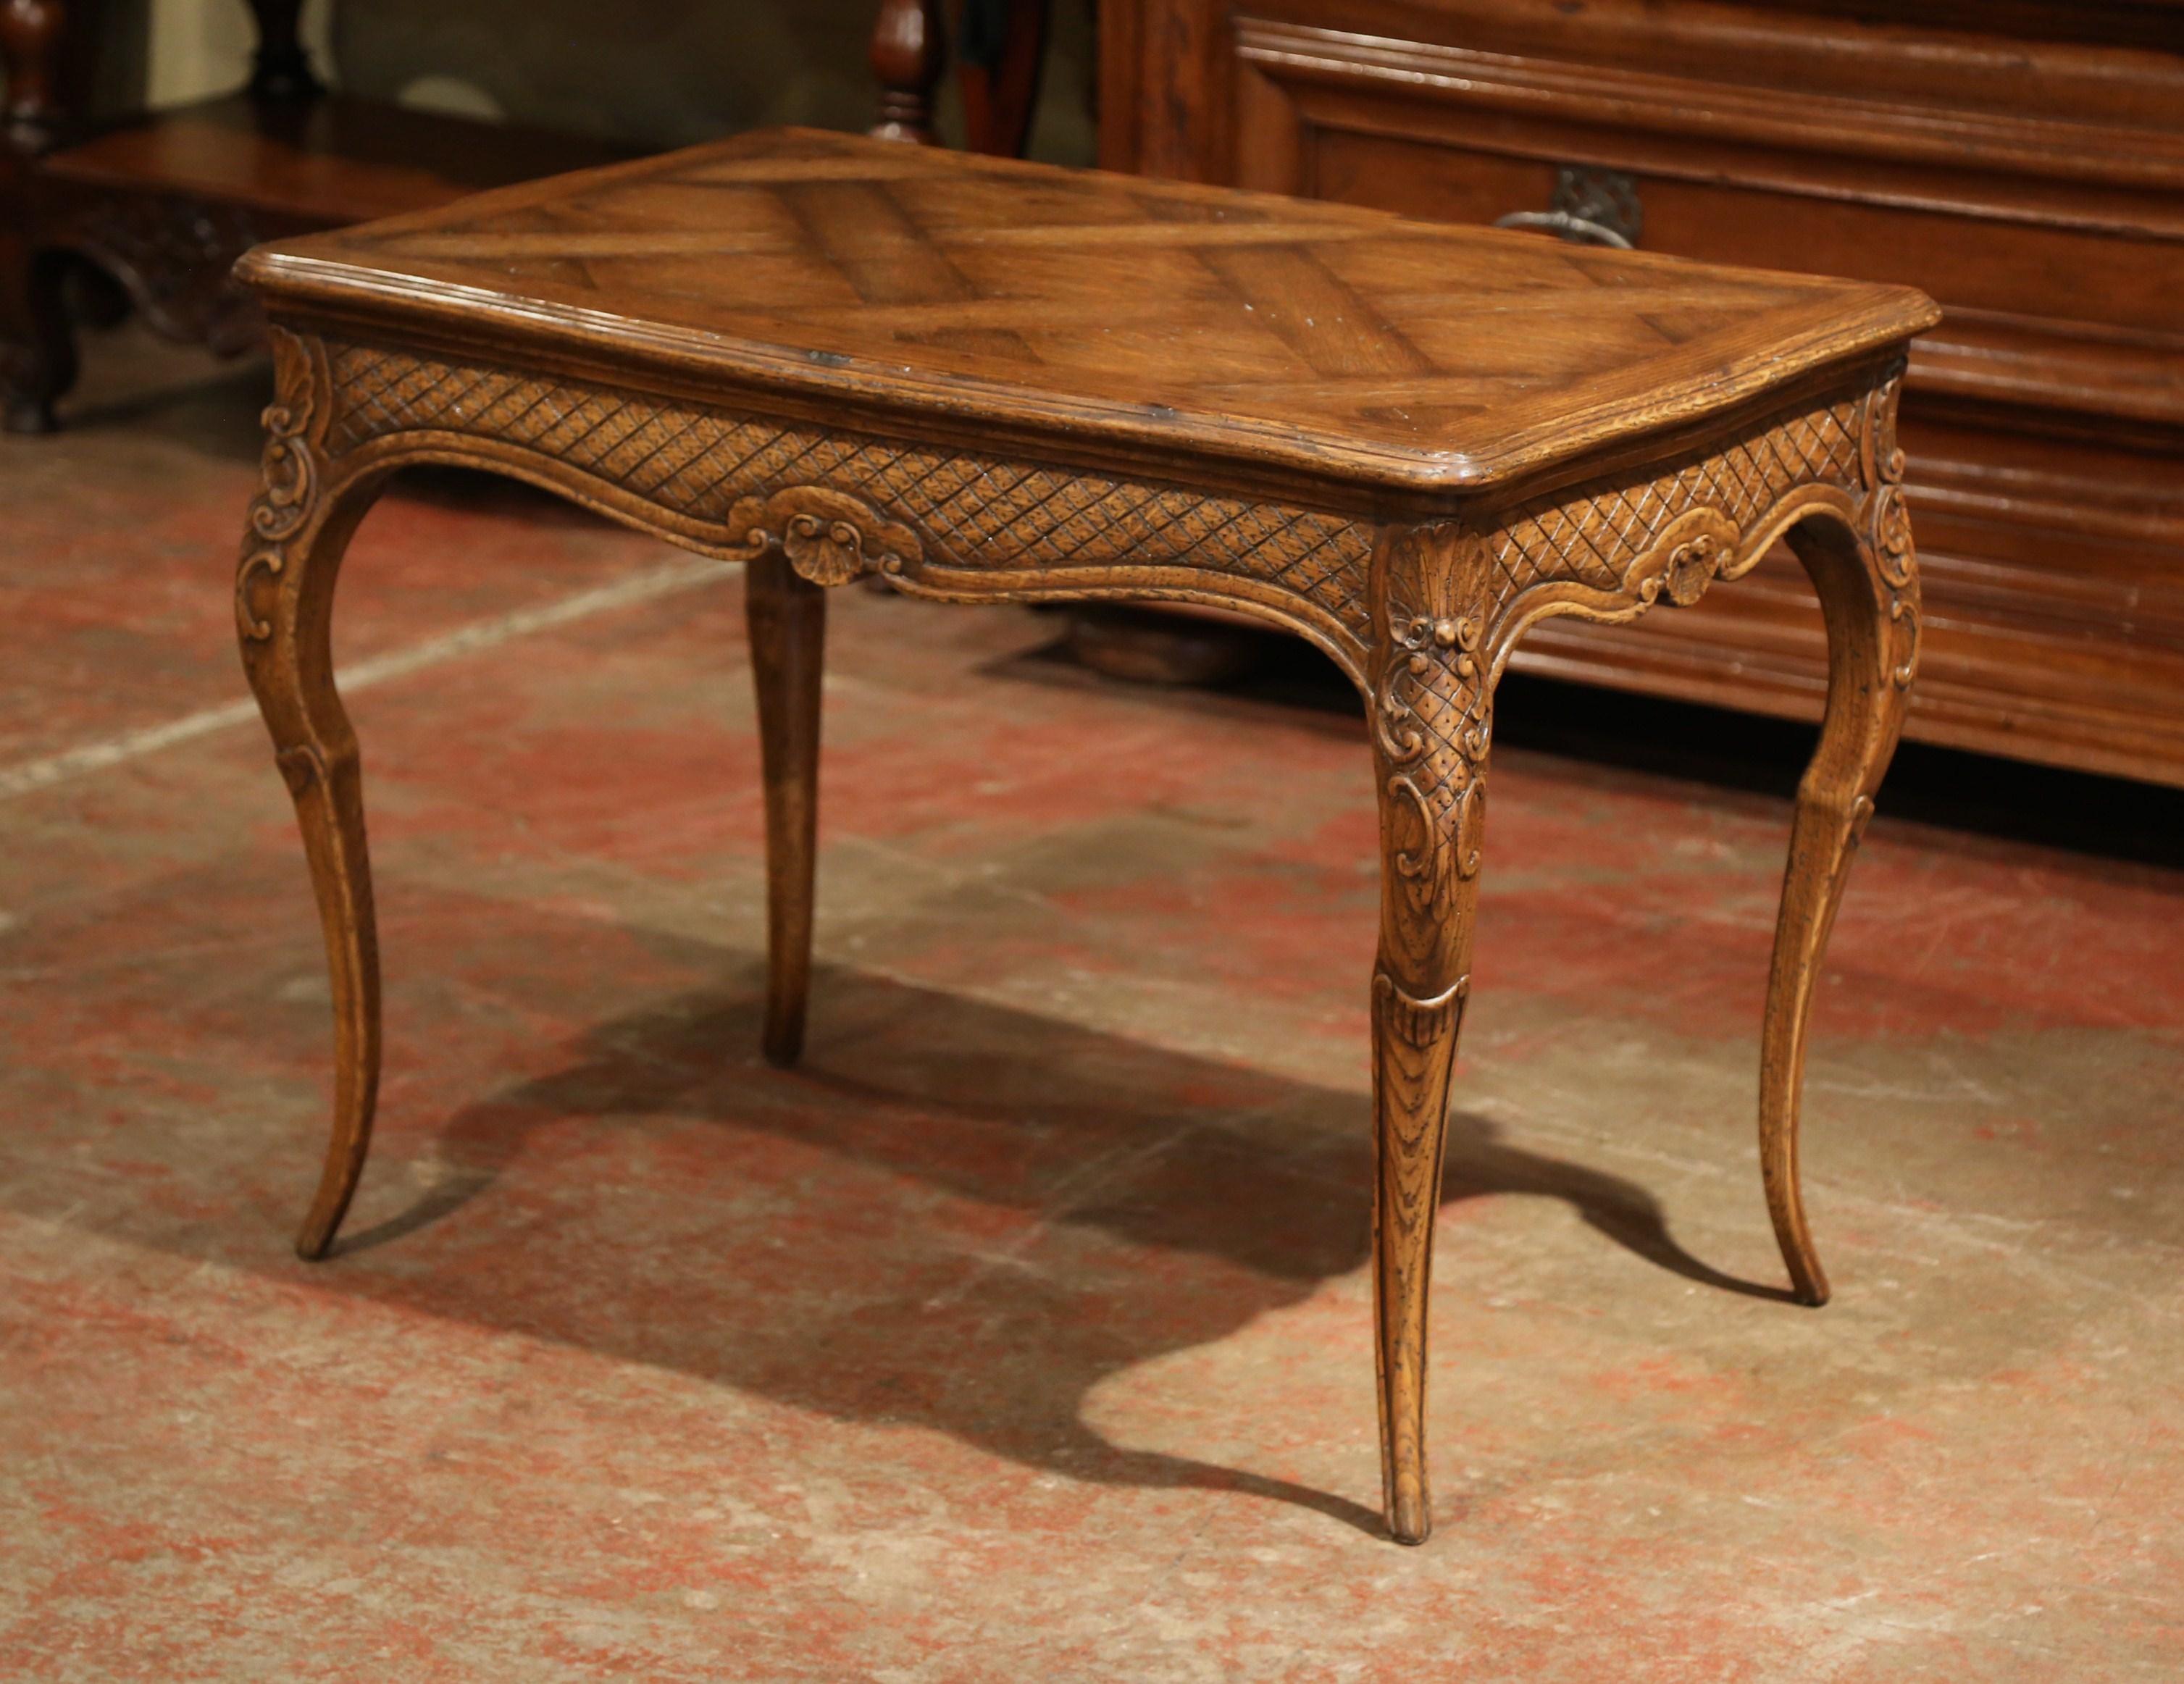 Midcentury French Louis XV Carved Oak Side Table with Inlay Parquetry Decor For Sale 1